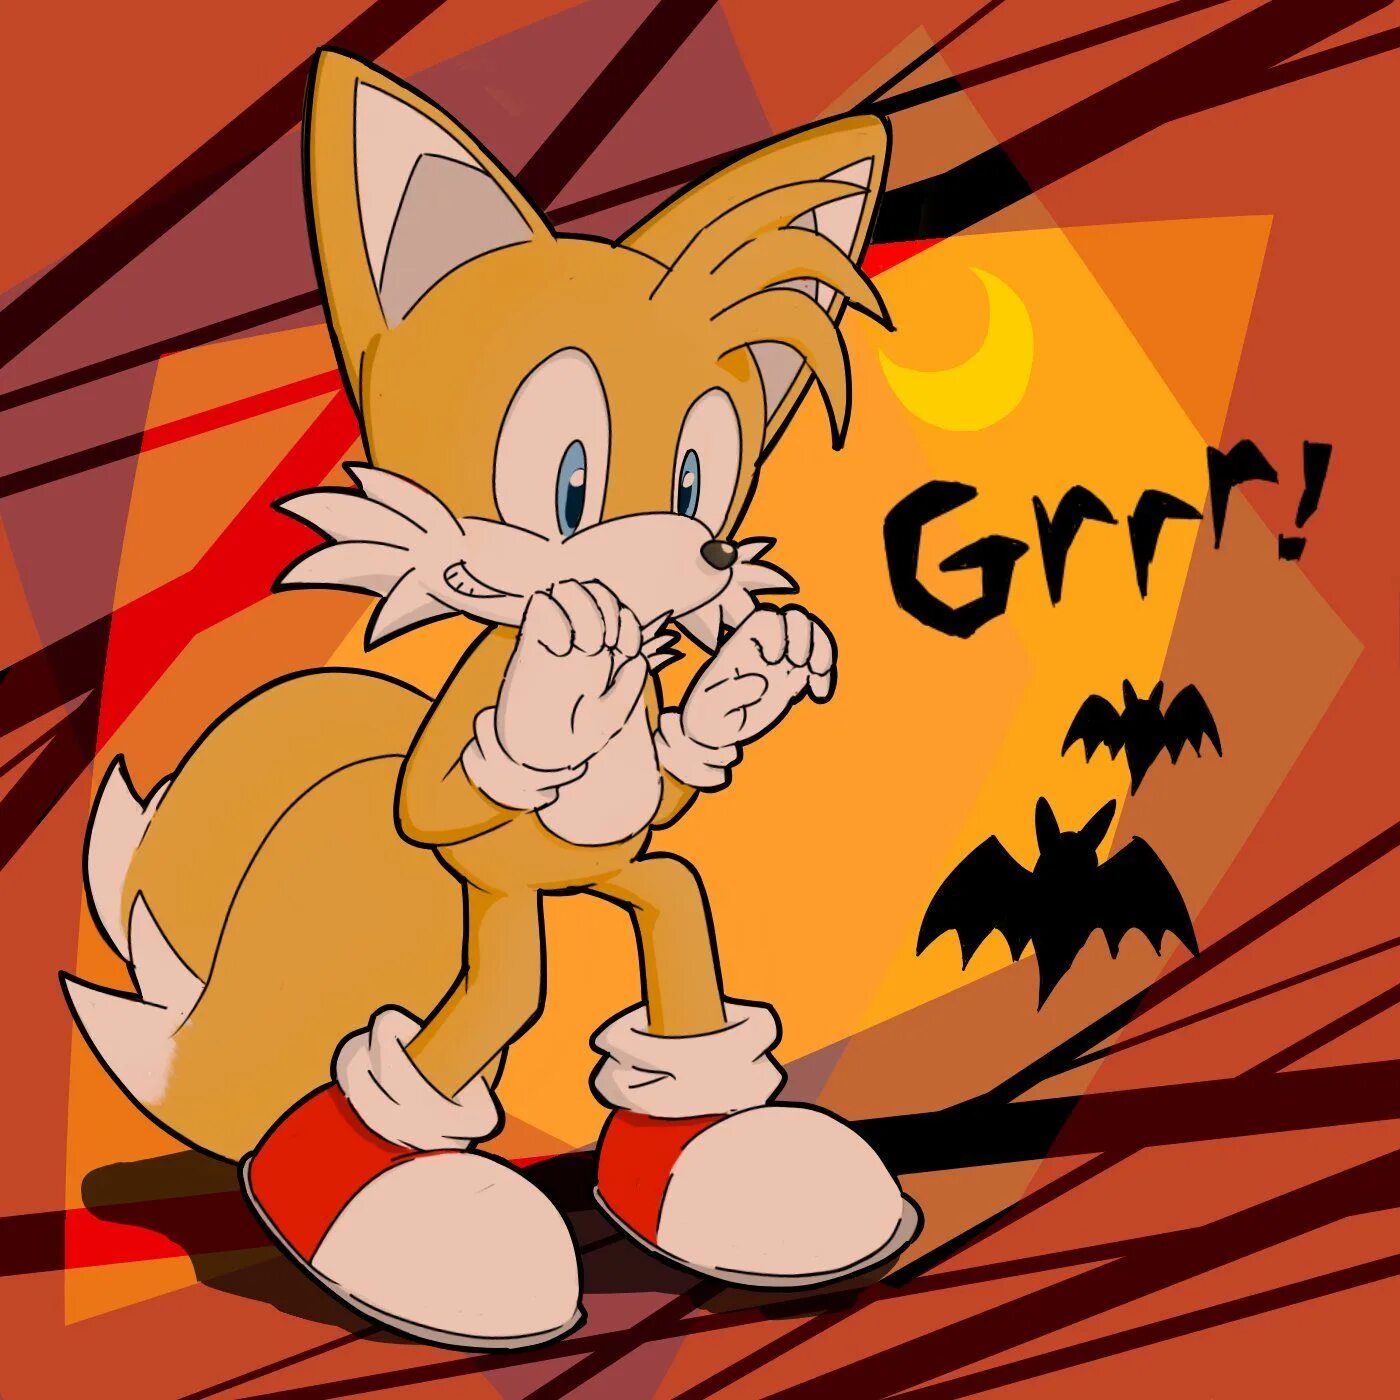 Tails animations. Tails Fan Art. Miles Tails. Miles Tails Prower Fan Art.